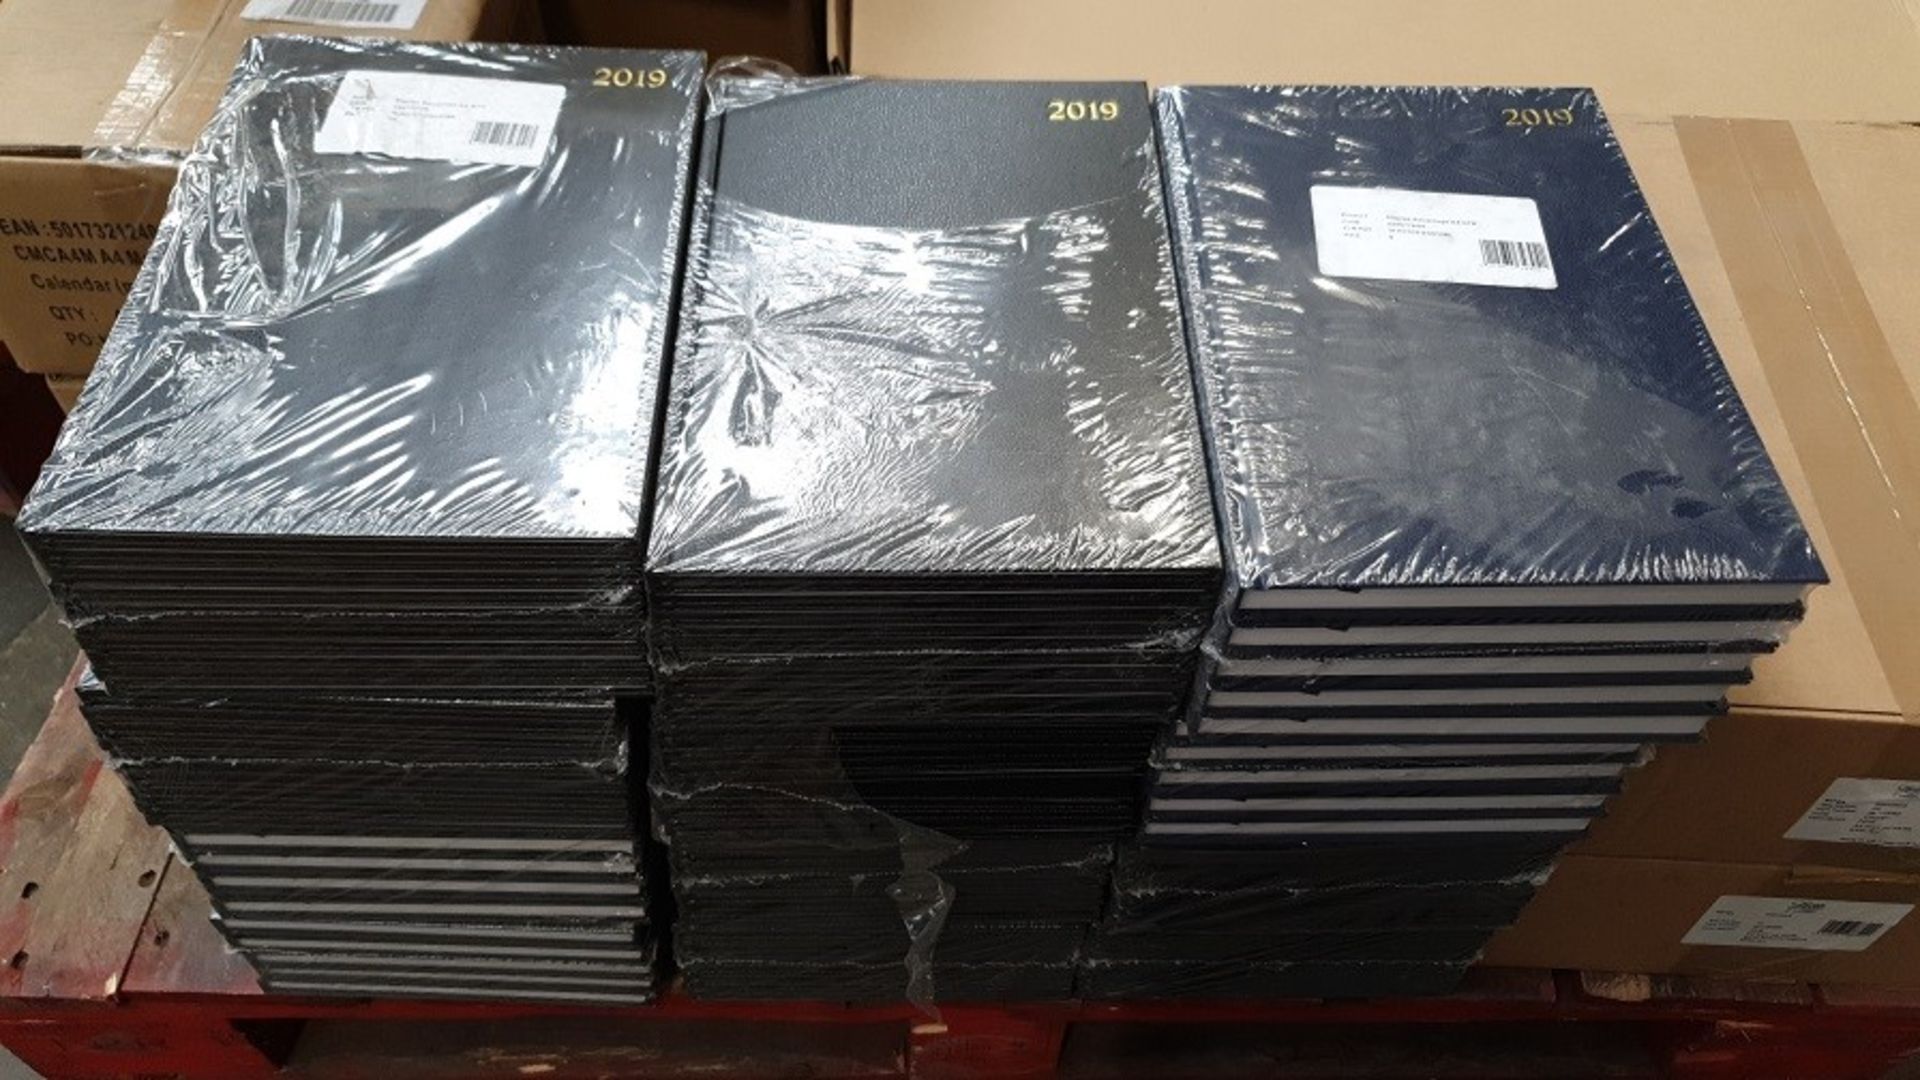 1 LOT TO CONTAIN 100 ASSORTED 2019 A5 DAY TO PAGE DIARYS IN NAVY AND BLACK / PN - 490 / RRP £550.